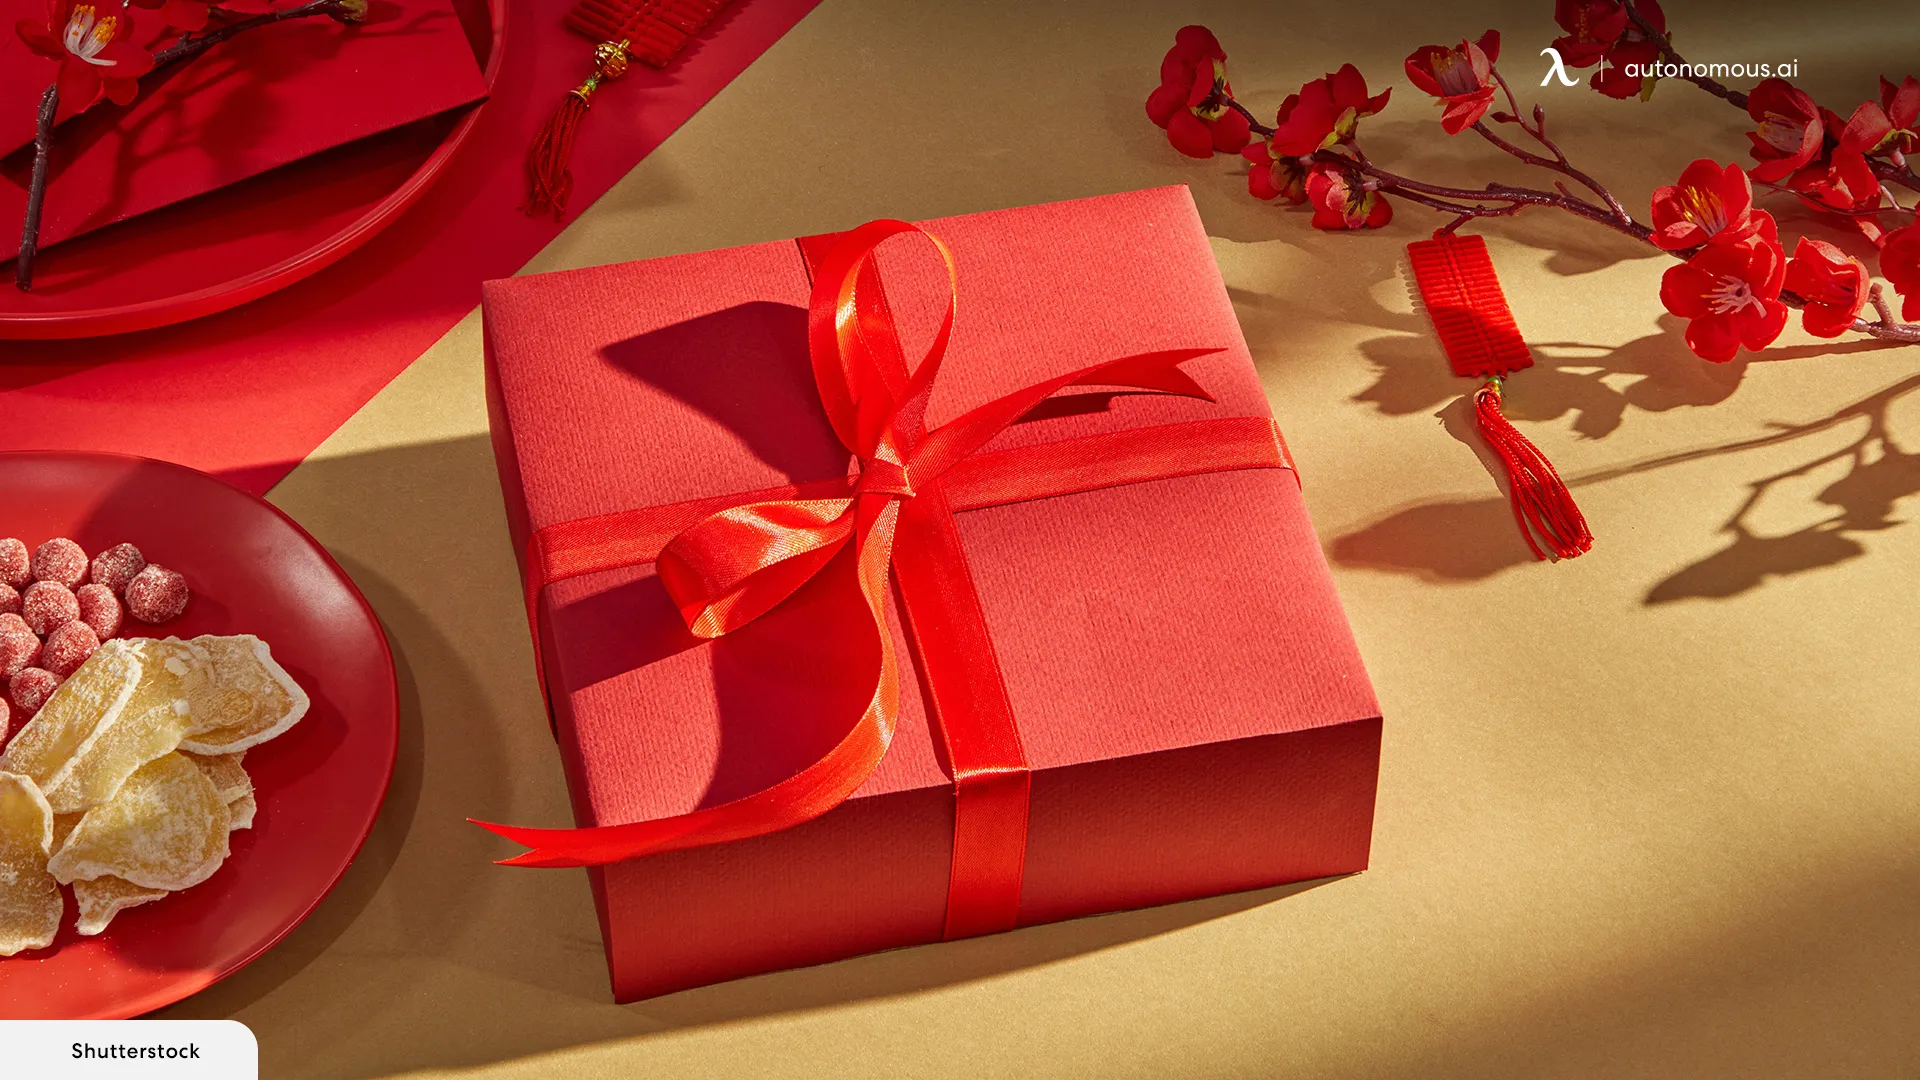 Unlock Joy: Gifts for Chinese Gift Exchange in Workplace